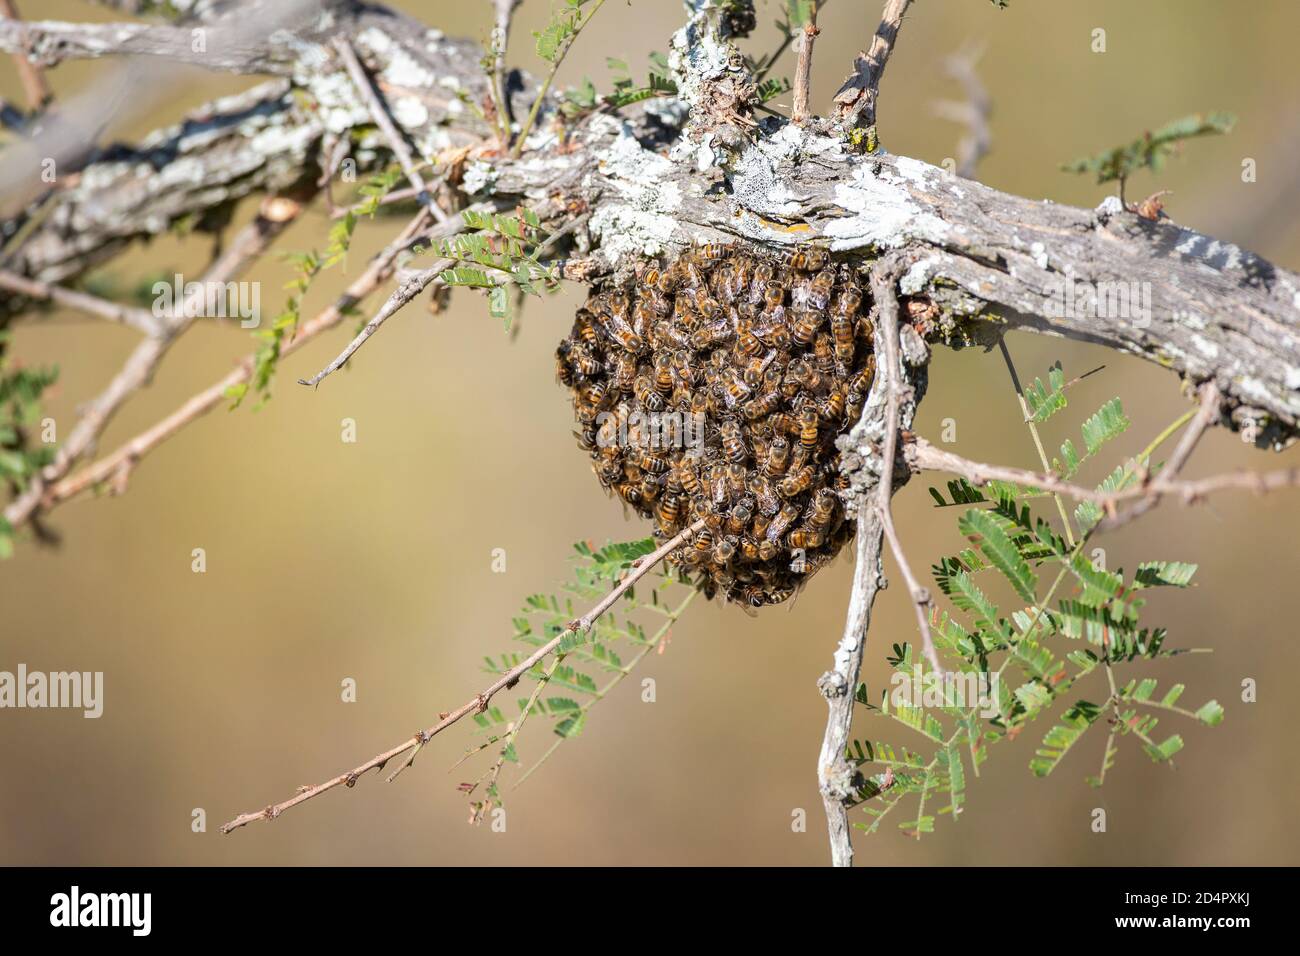 Small nest of wild bees (Apis mellifera) clustered underneath a branch Stock Photo